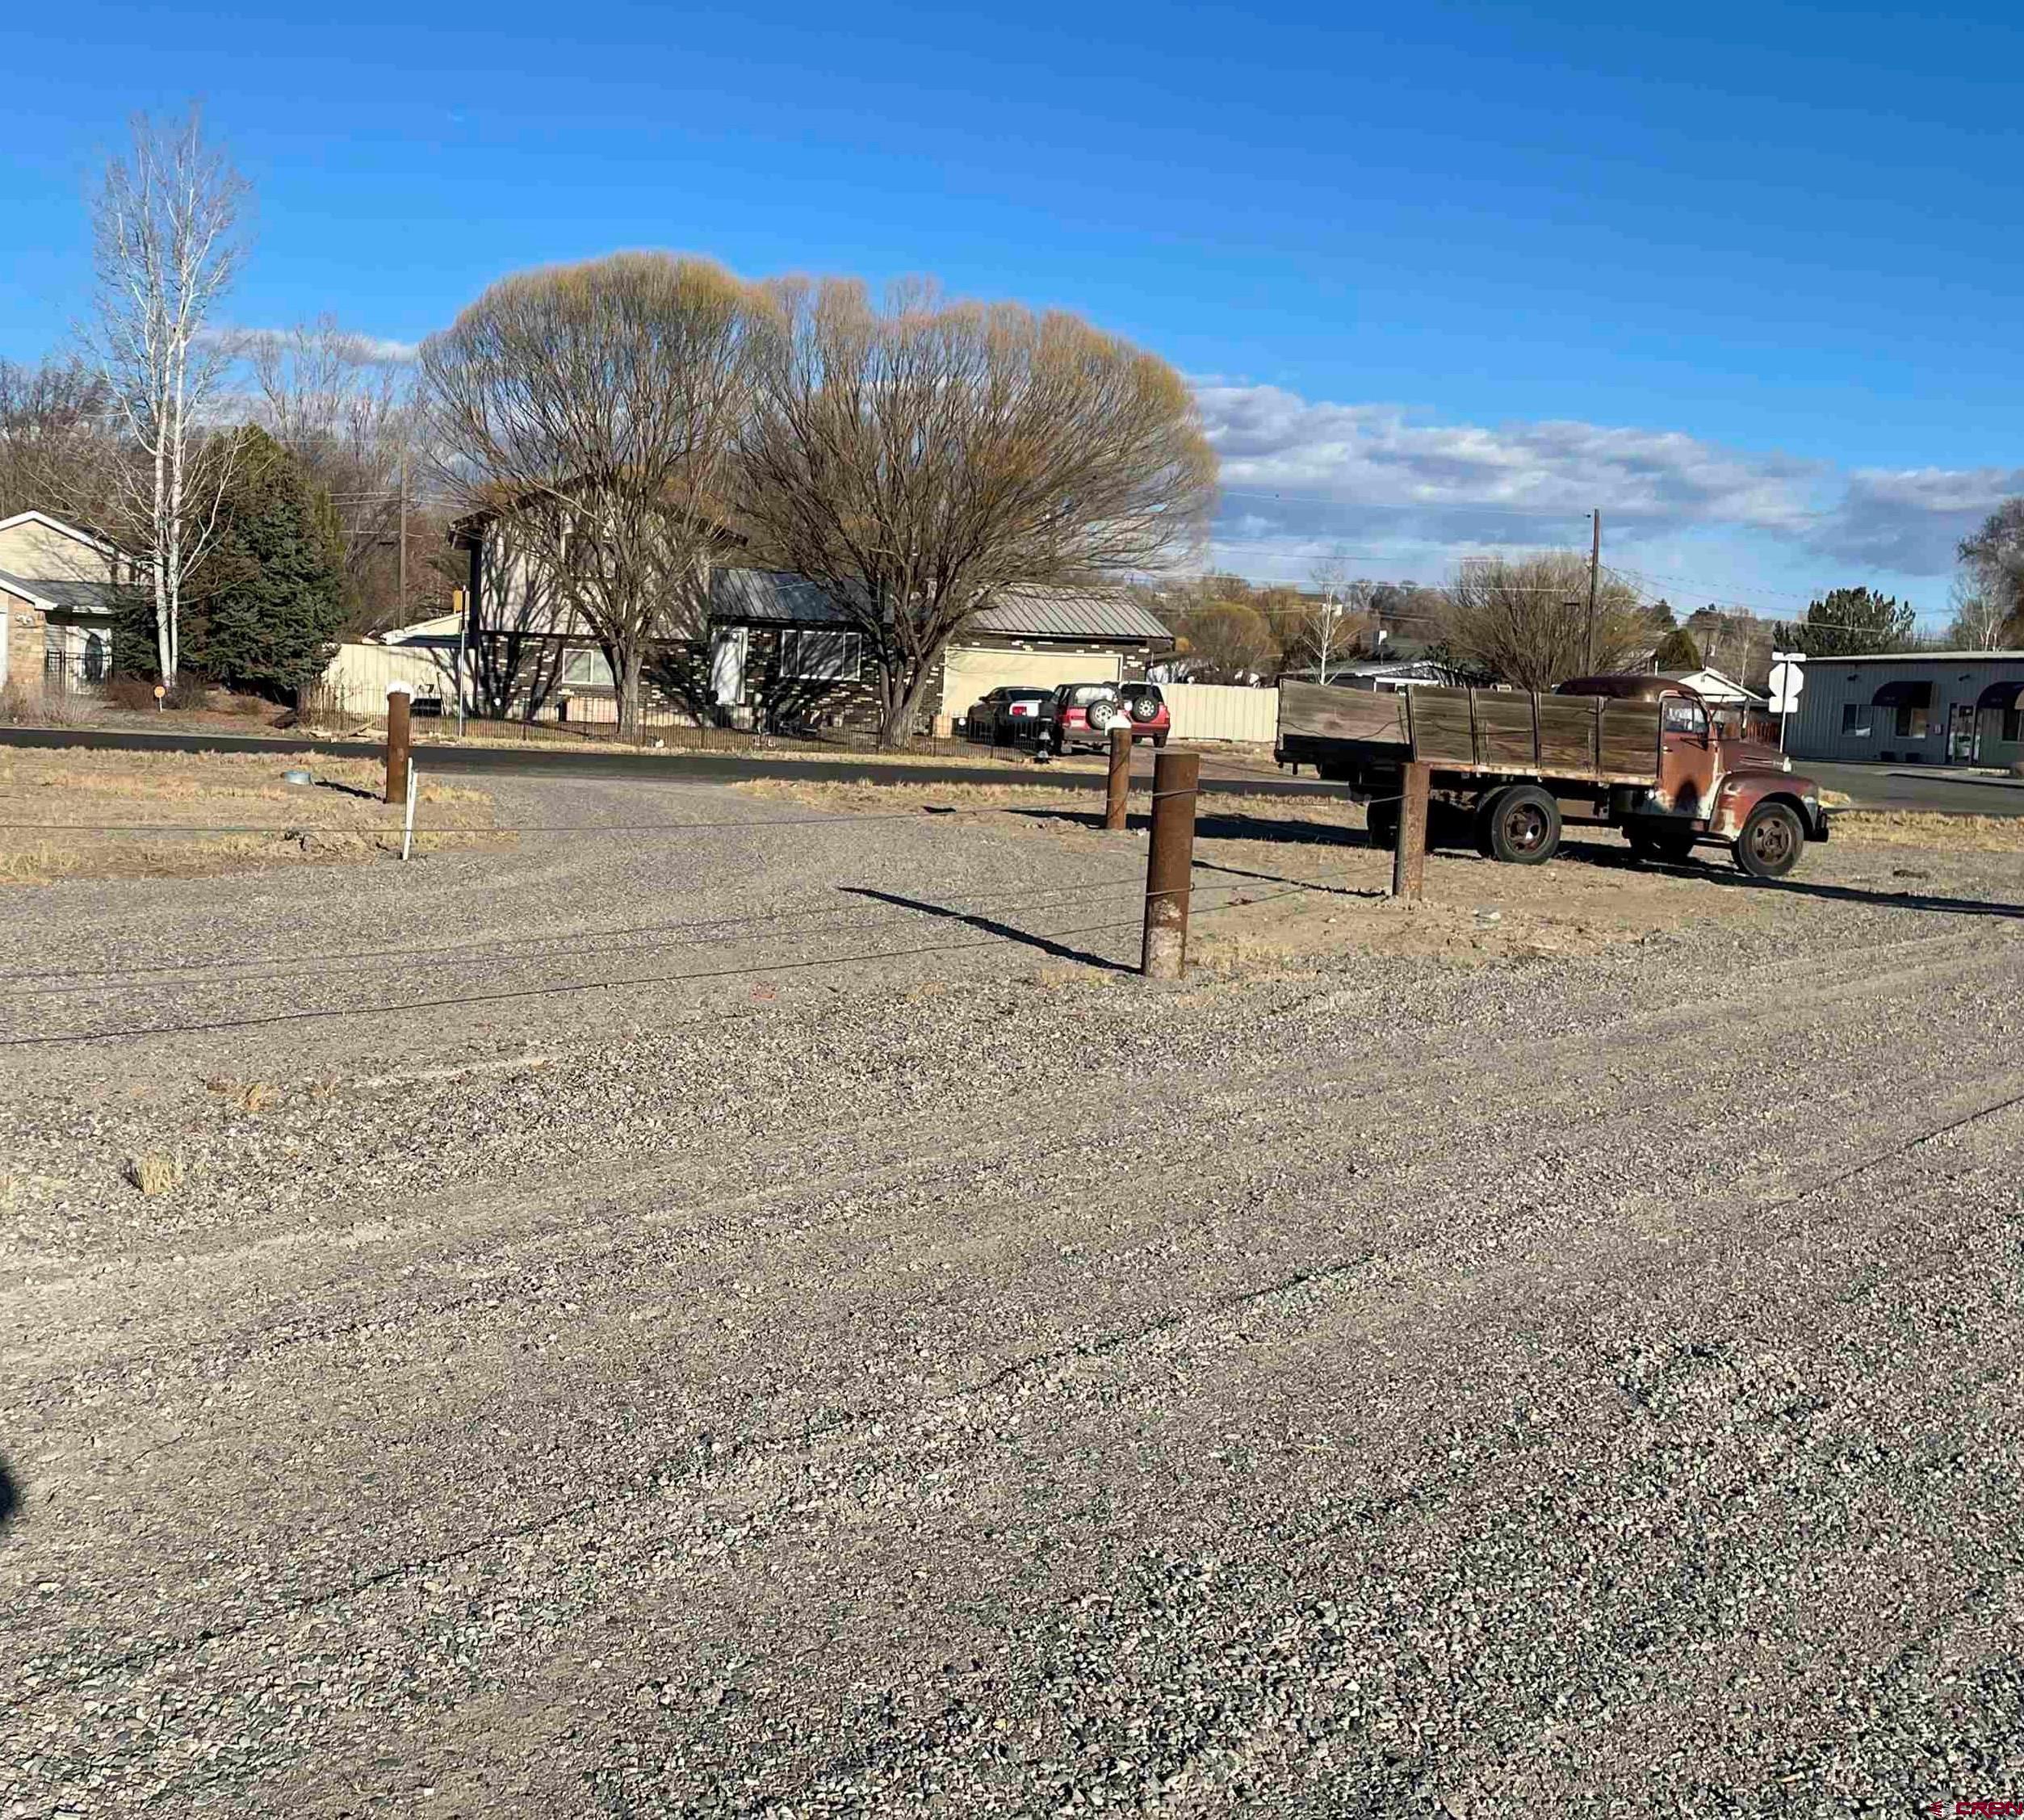 This lot is in an excellent location in downtown Delta on the corner of Hwy 50 and Grand avenue.  Easy access on and off Hwy 50.  New 200 amp electric service, New rusty metal privacy fence.  Three water taps from City of Delta and 2 City of Delta sewer taps.  Natural gas to lot line.  New Graveled parking lot and circle drive.  230 feet of Hwy 50 frontage and 250 ft of Grand Ave frontage, two entrances already established off grand one one off Hwy 50.